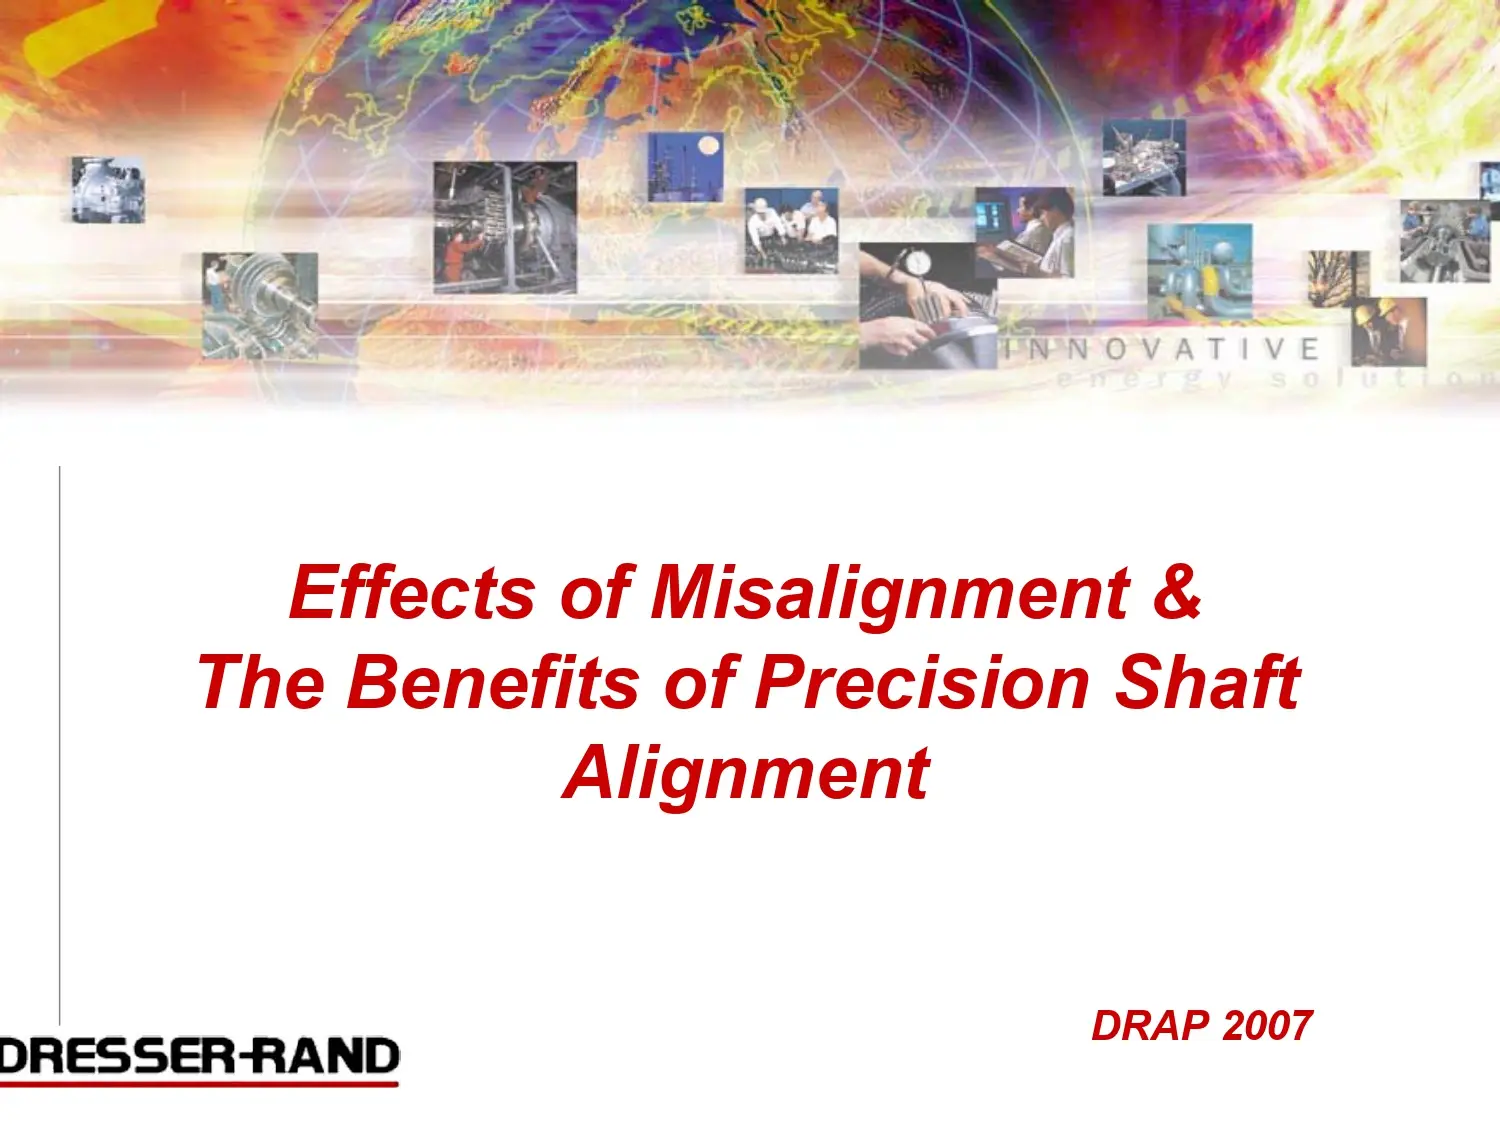 Effects of Misalignment & The Benefits of Precision Shaft Alignment